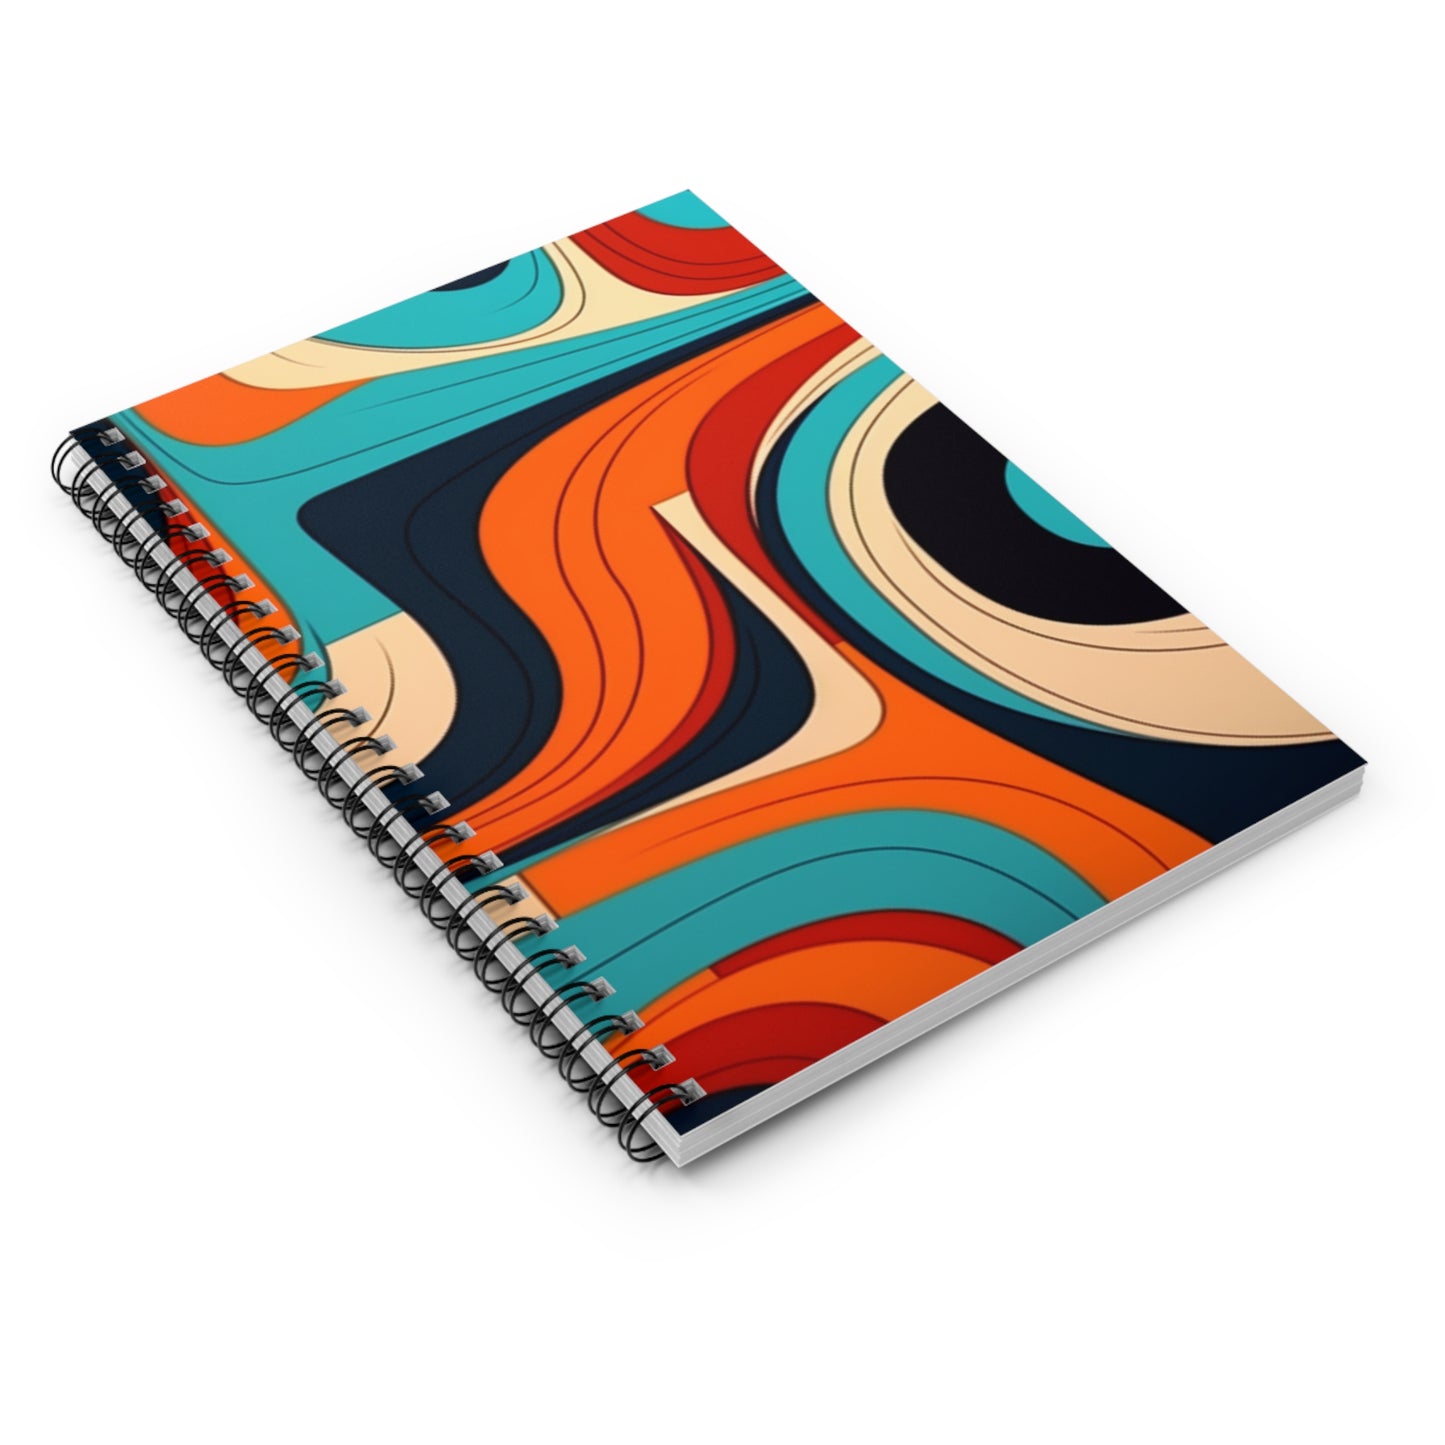 Midcentury Abstractions: Abstract-Inspired Spiral Notebook for Atomic Age Design